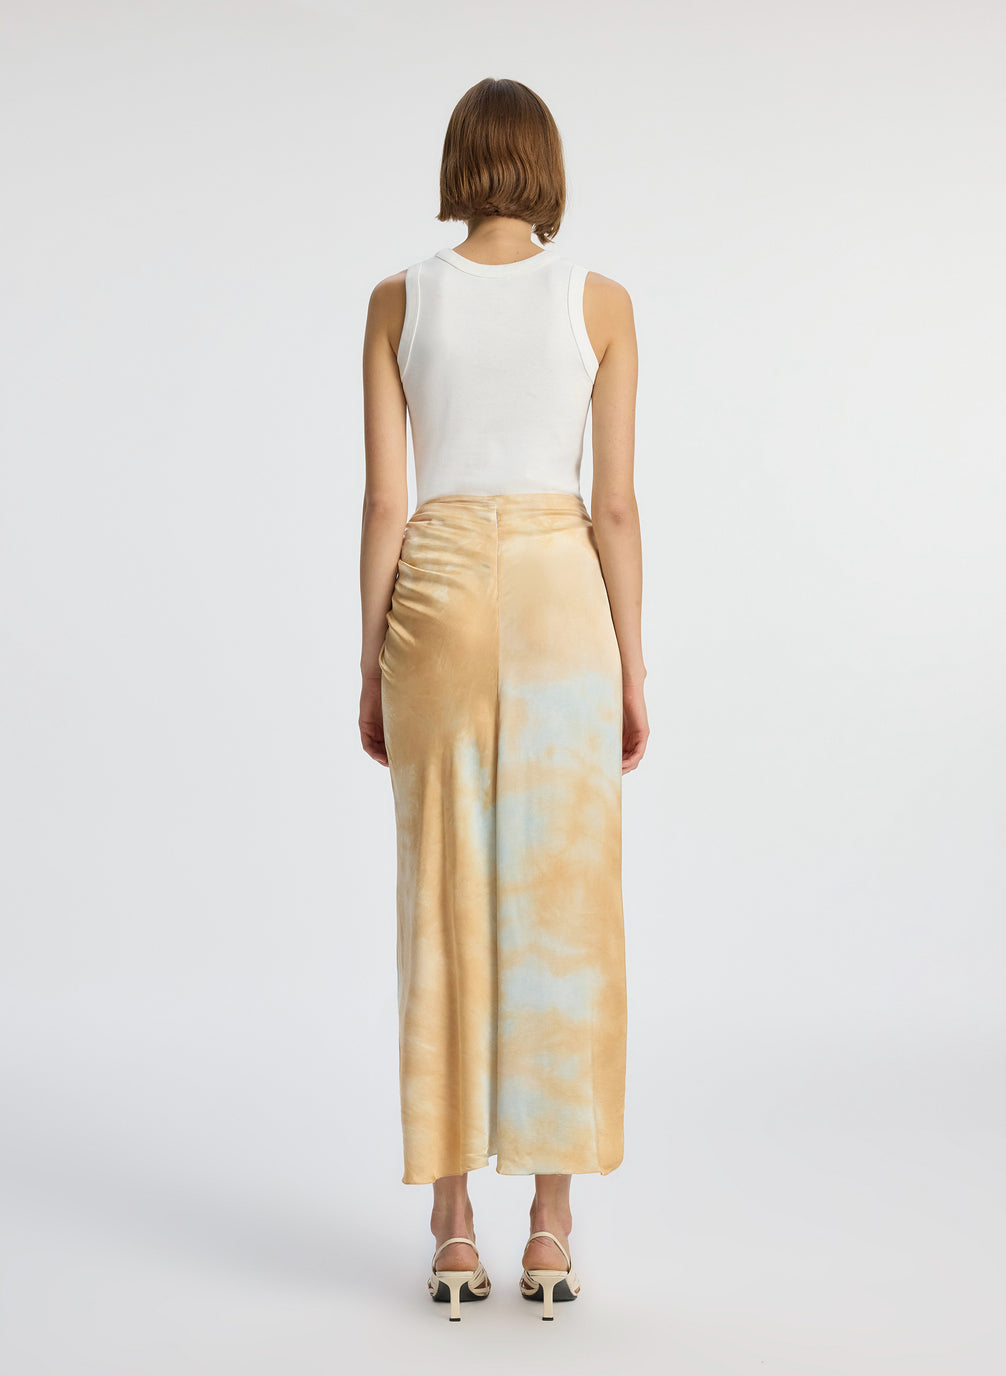 back view of woman wearing white tank top and blue and beige midi skirt